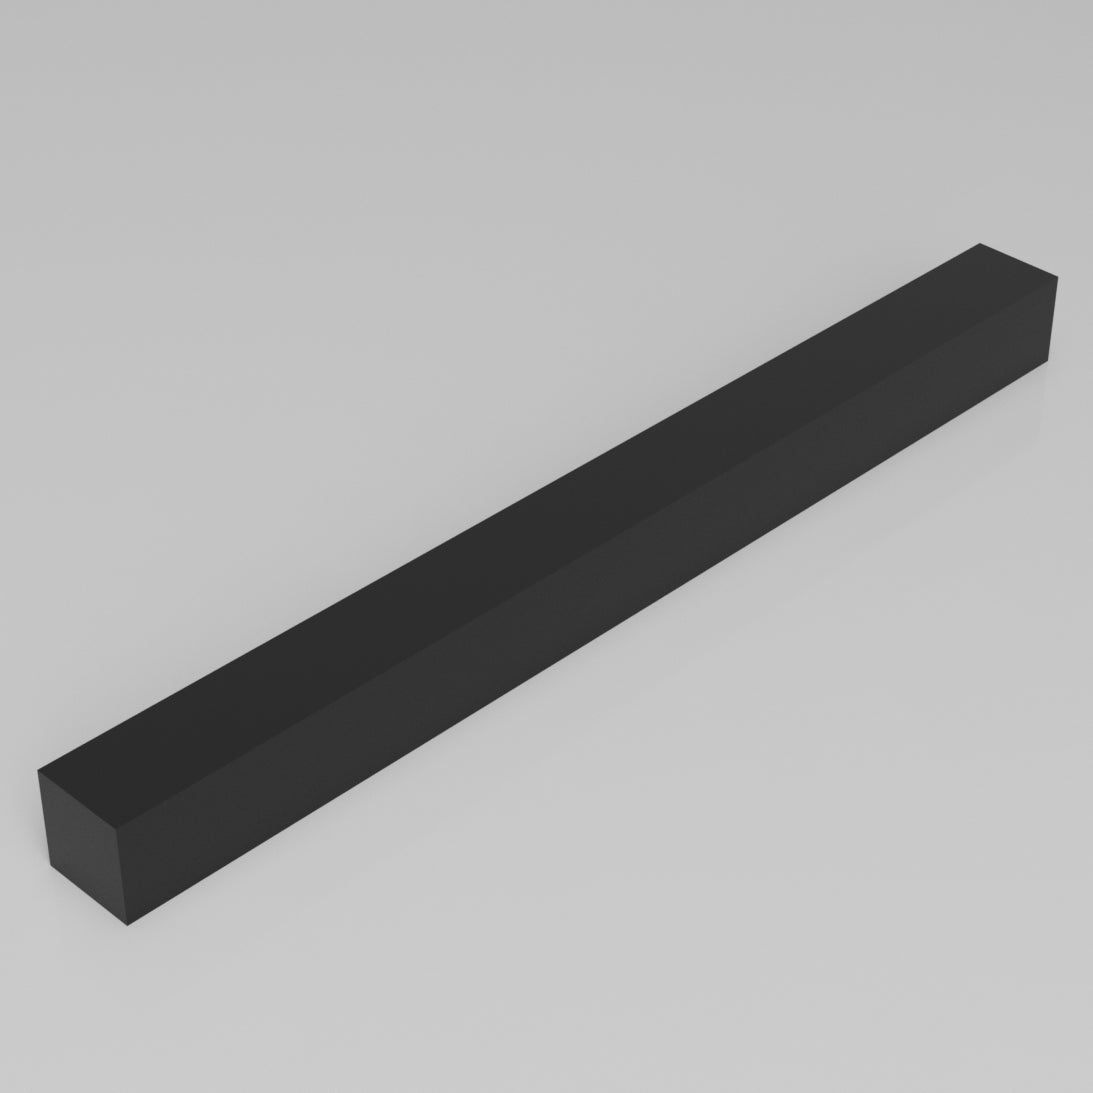 Machinable Wax Rectangular Block Front View 2 Inch by 2 Inch by 24 Inch